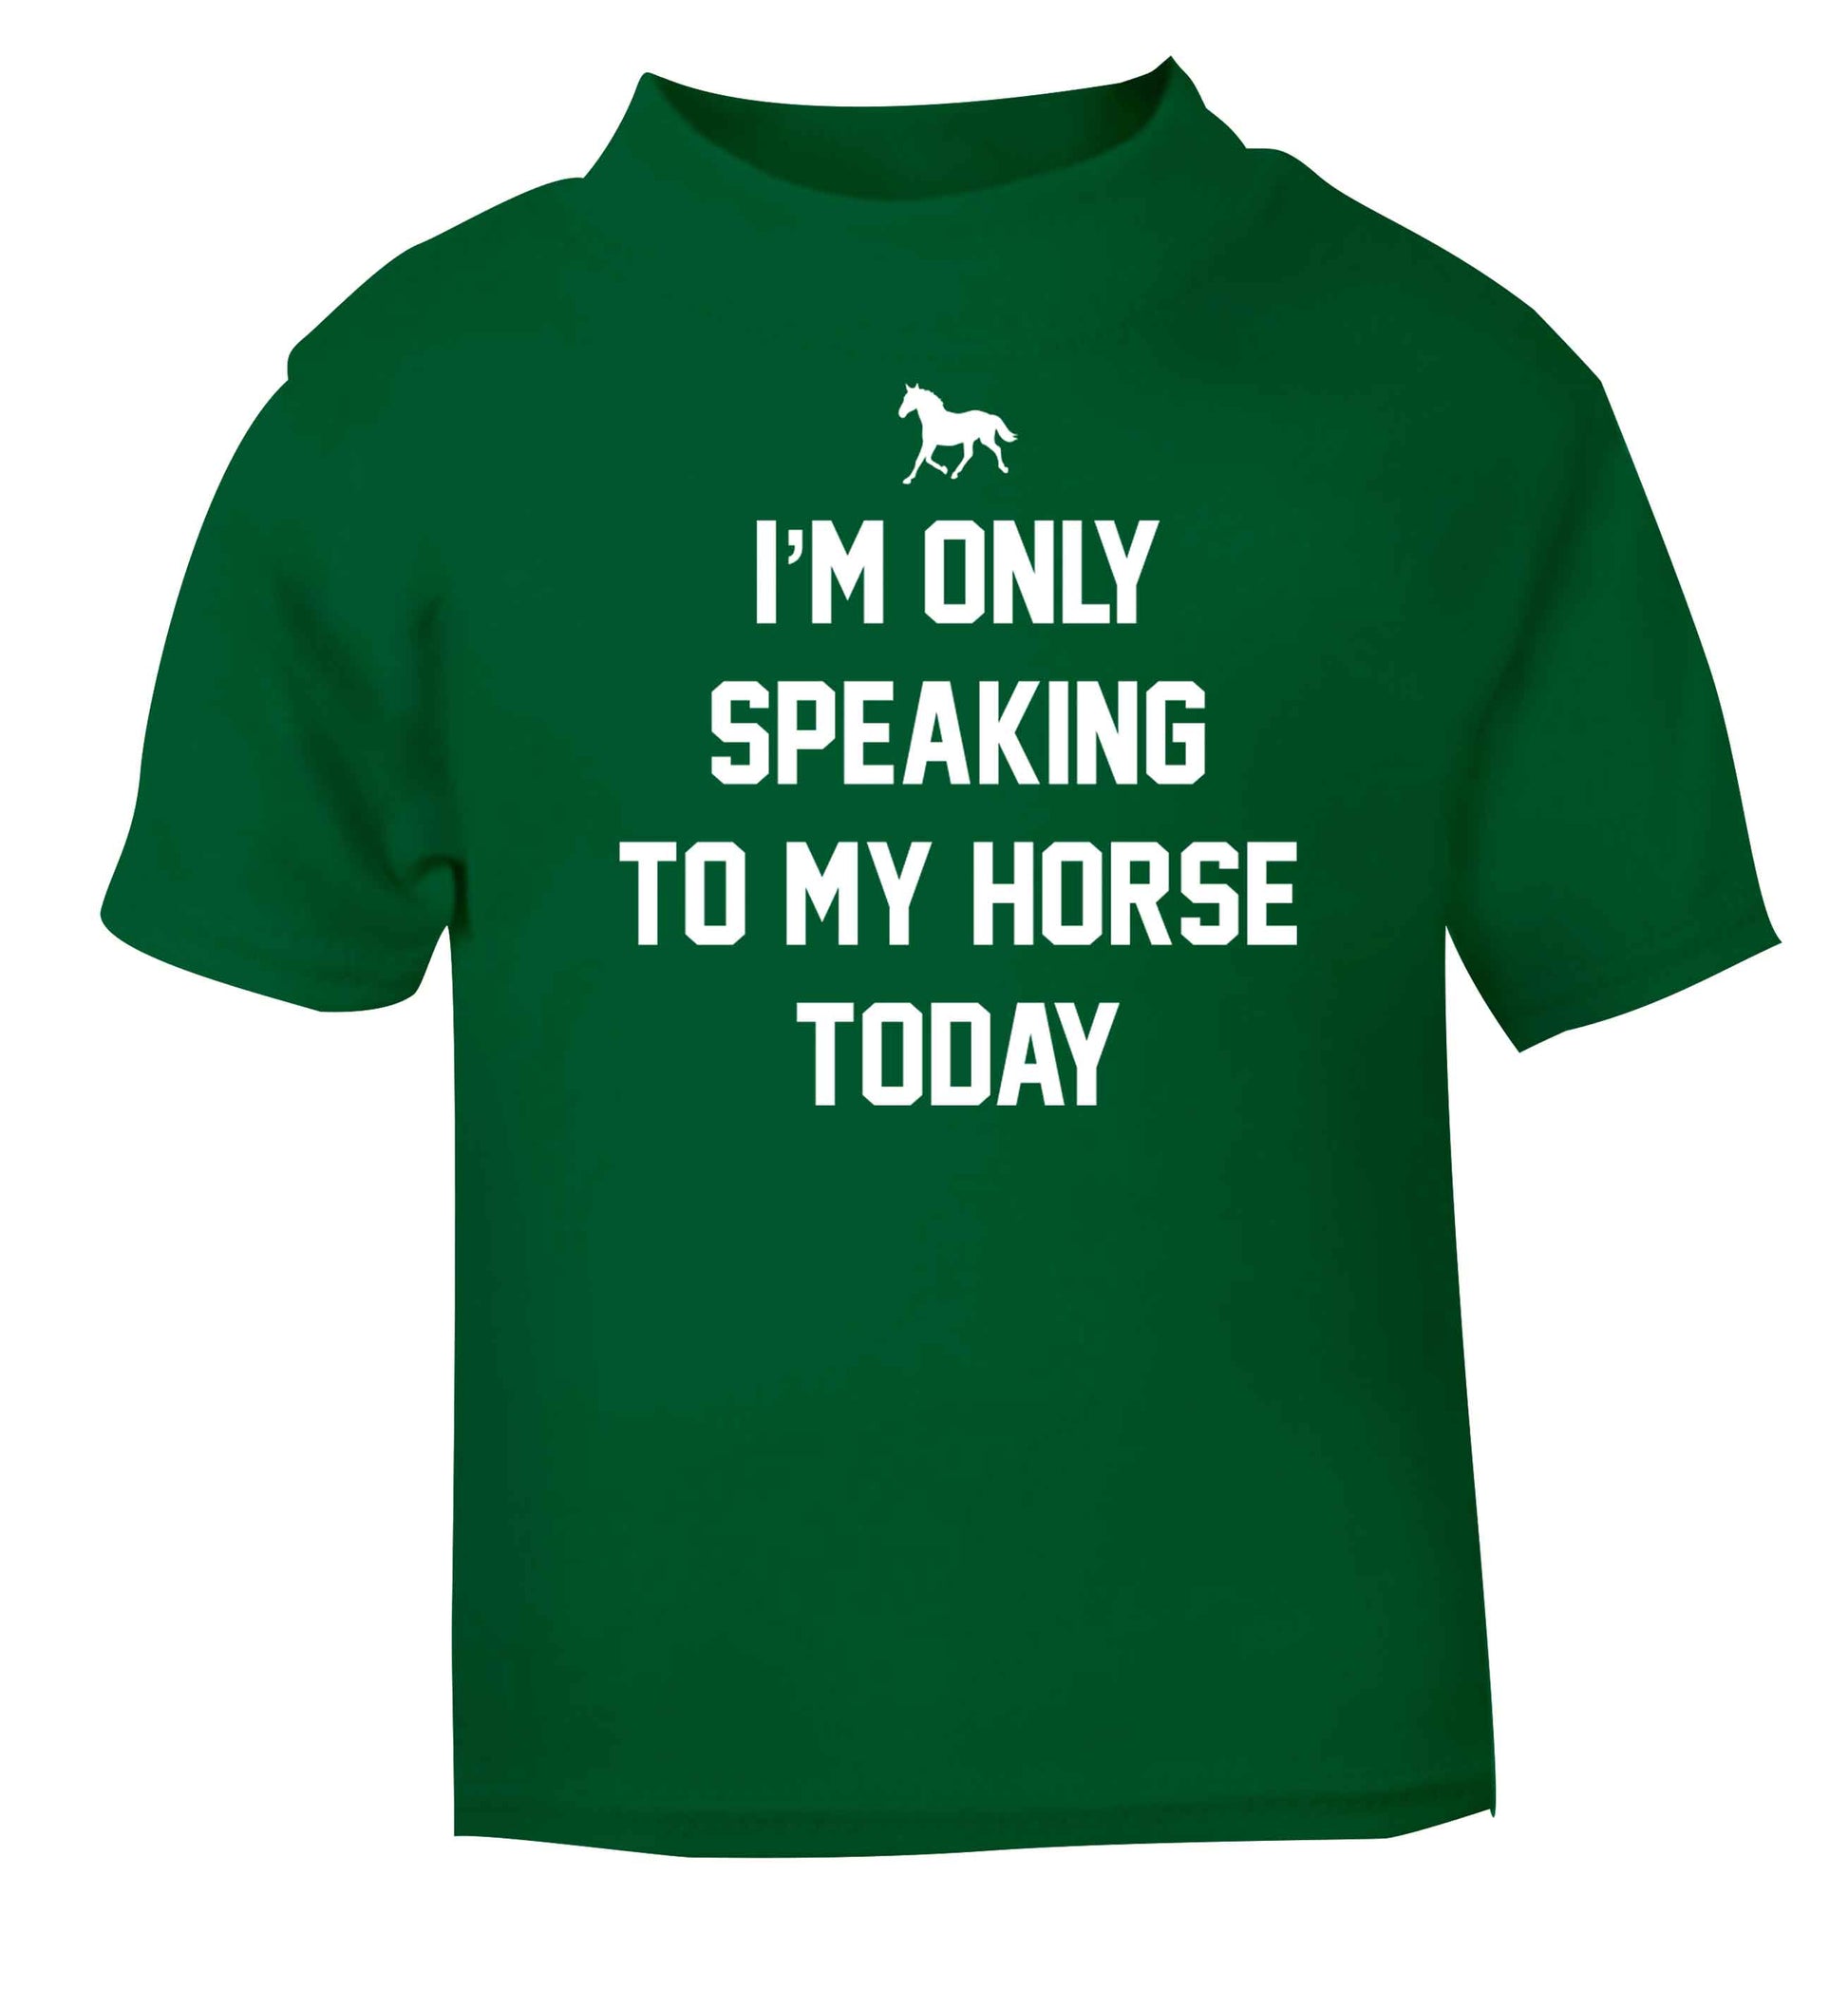 I'm only speaking to my horse today green baby toddler Tshirt 2 Years